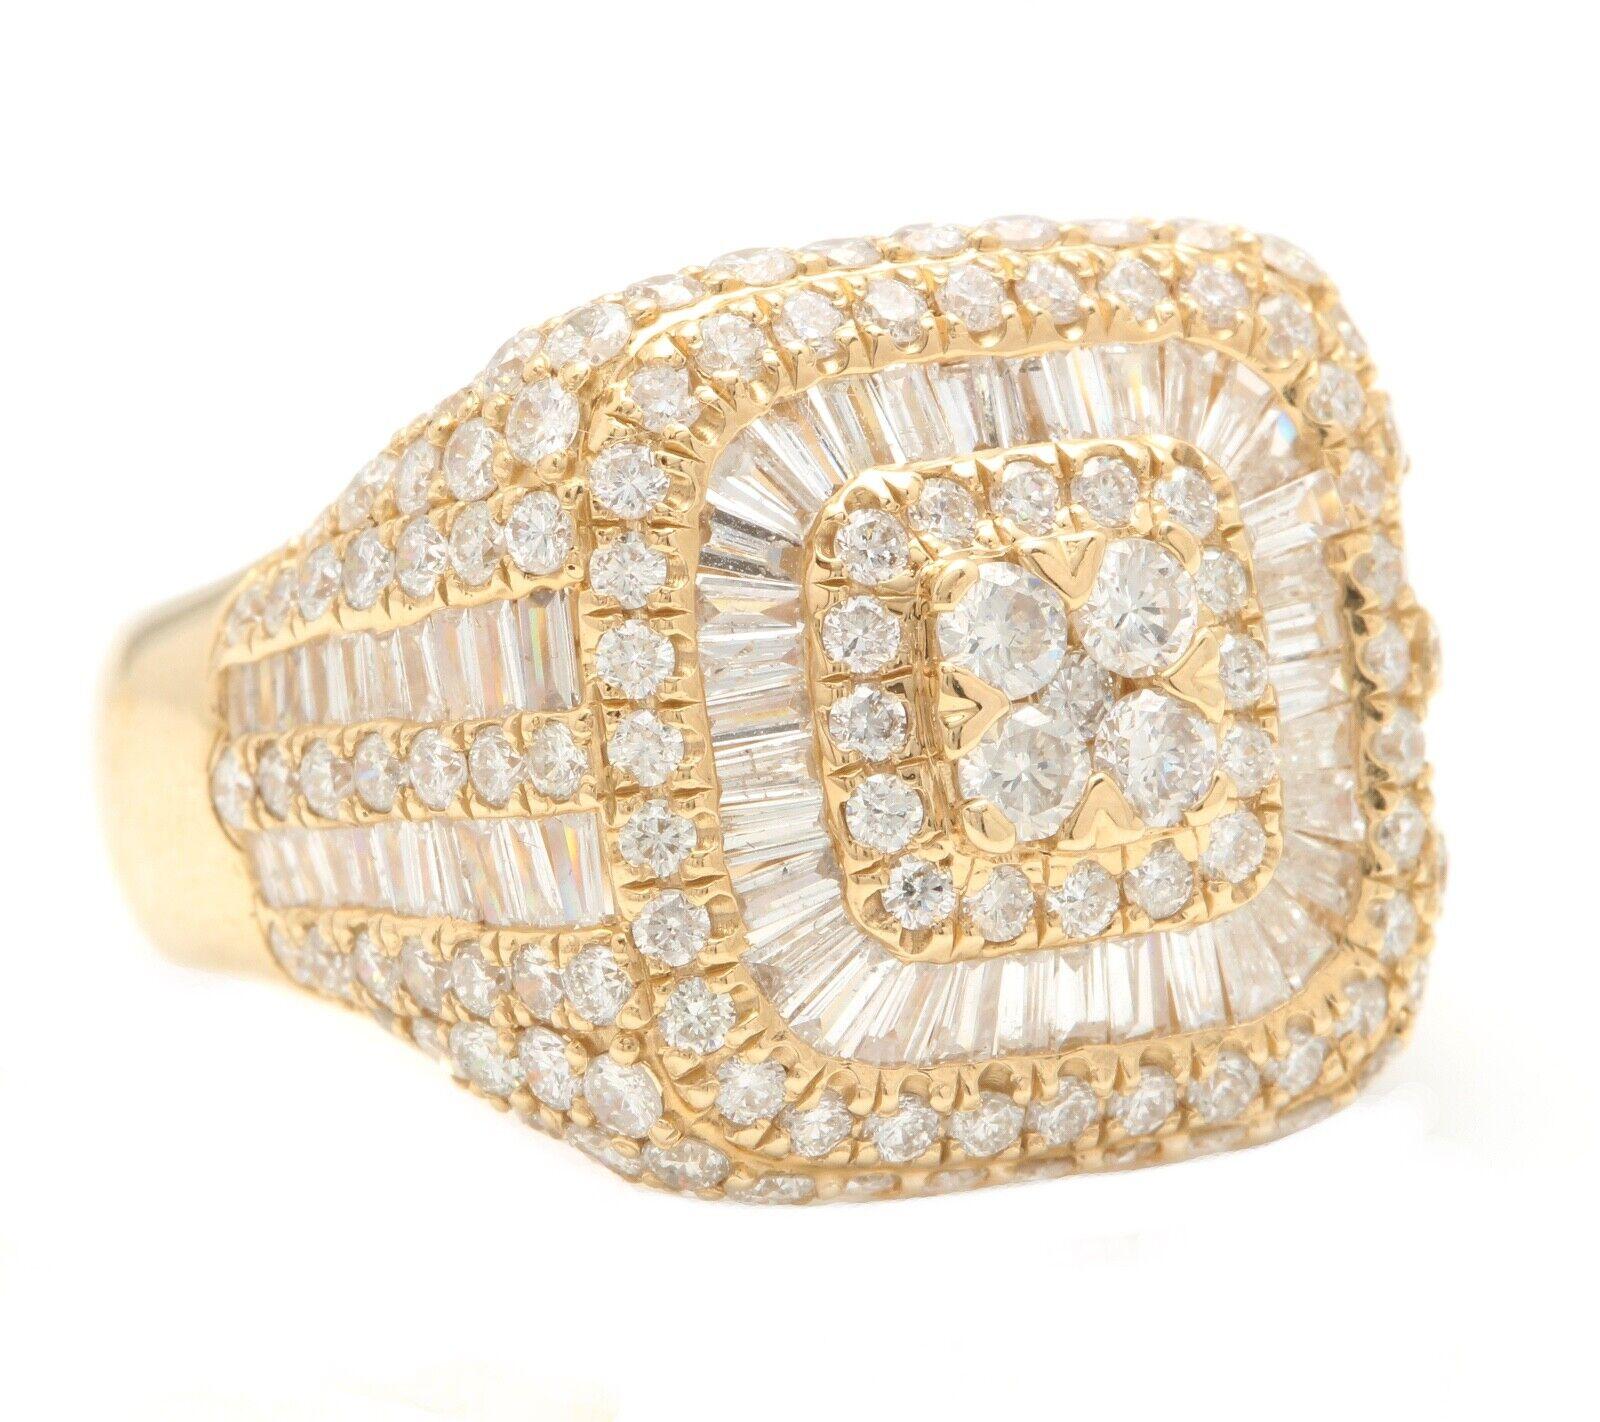 3.69Ct Natural Diamond 14K Solid Yellow Gold Men's Ring

Amazing looking piece!

Suggested Replacement Value Approx. 9,000.00

Total Natural Round & Baguette Cut Diamonds Weight: Approx. 3.69 Carats (color H / Clarity SI1-SI2)

Width of the ring: